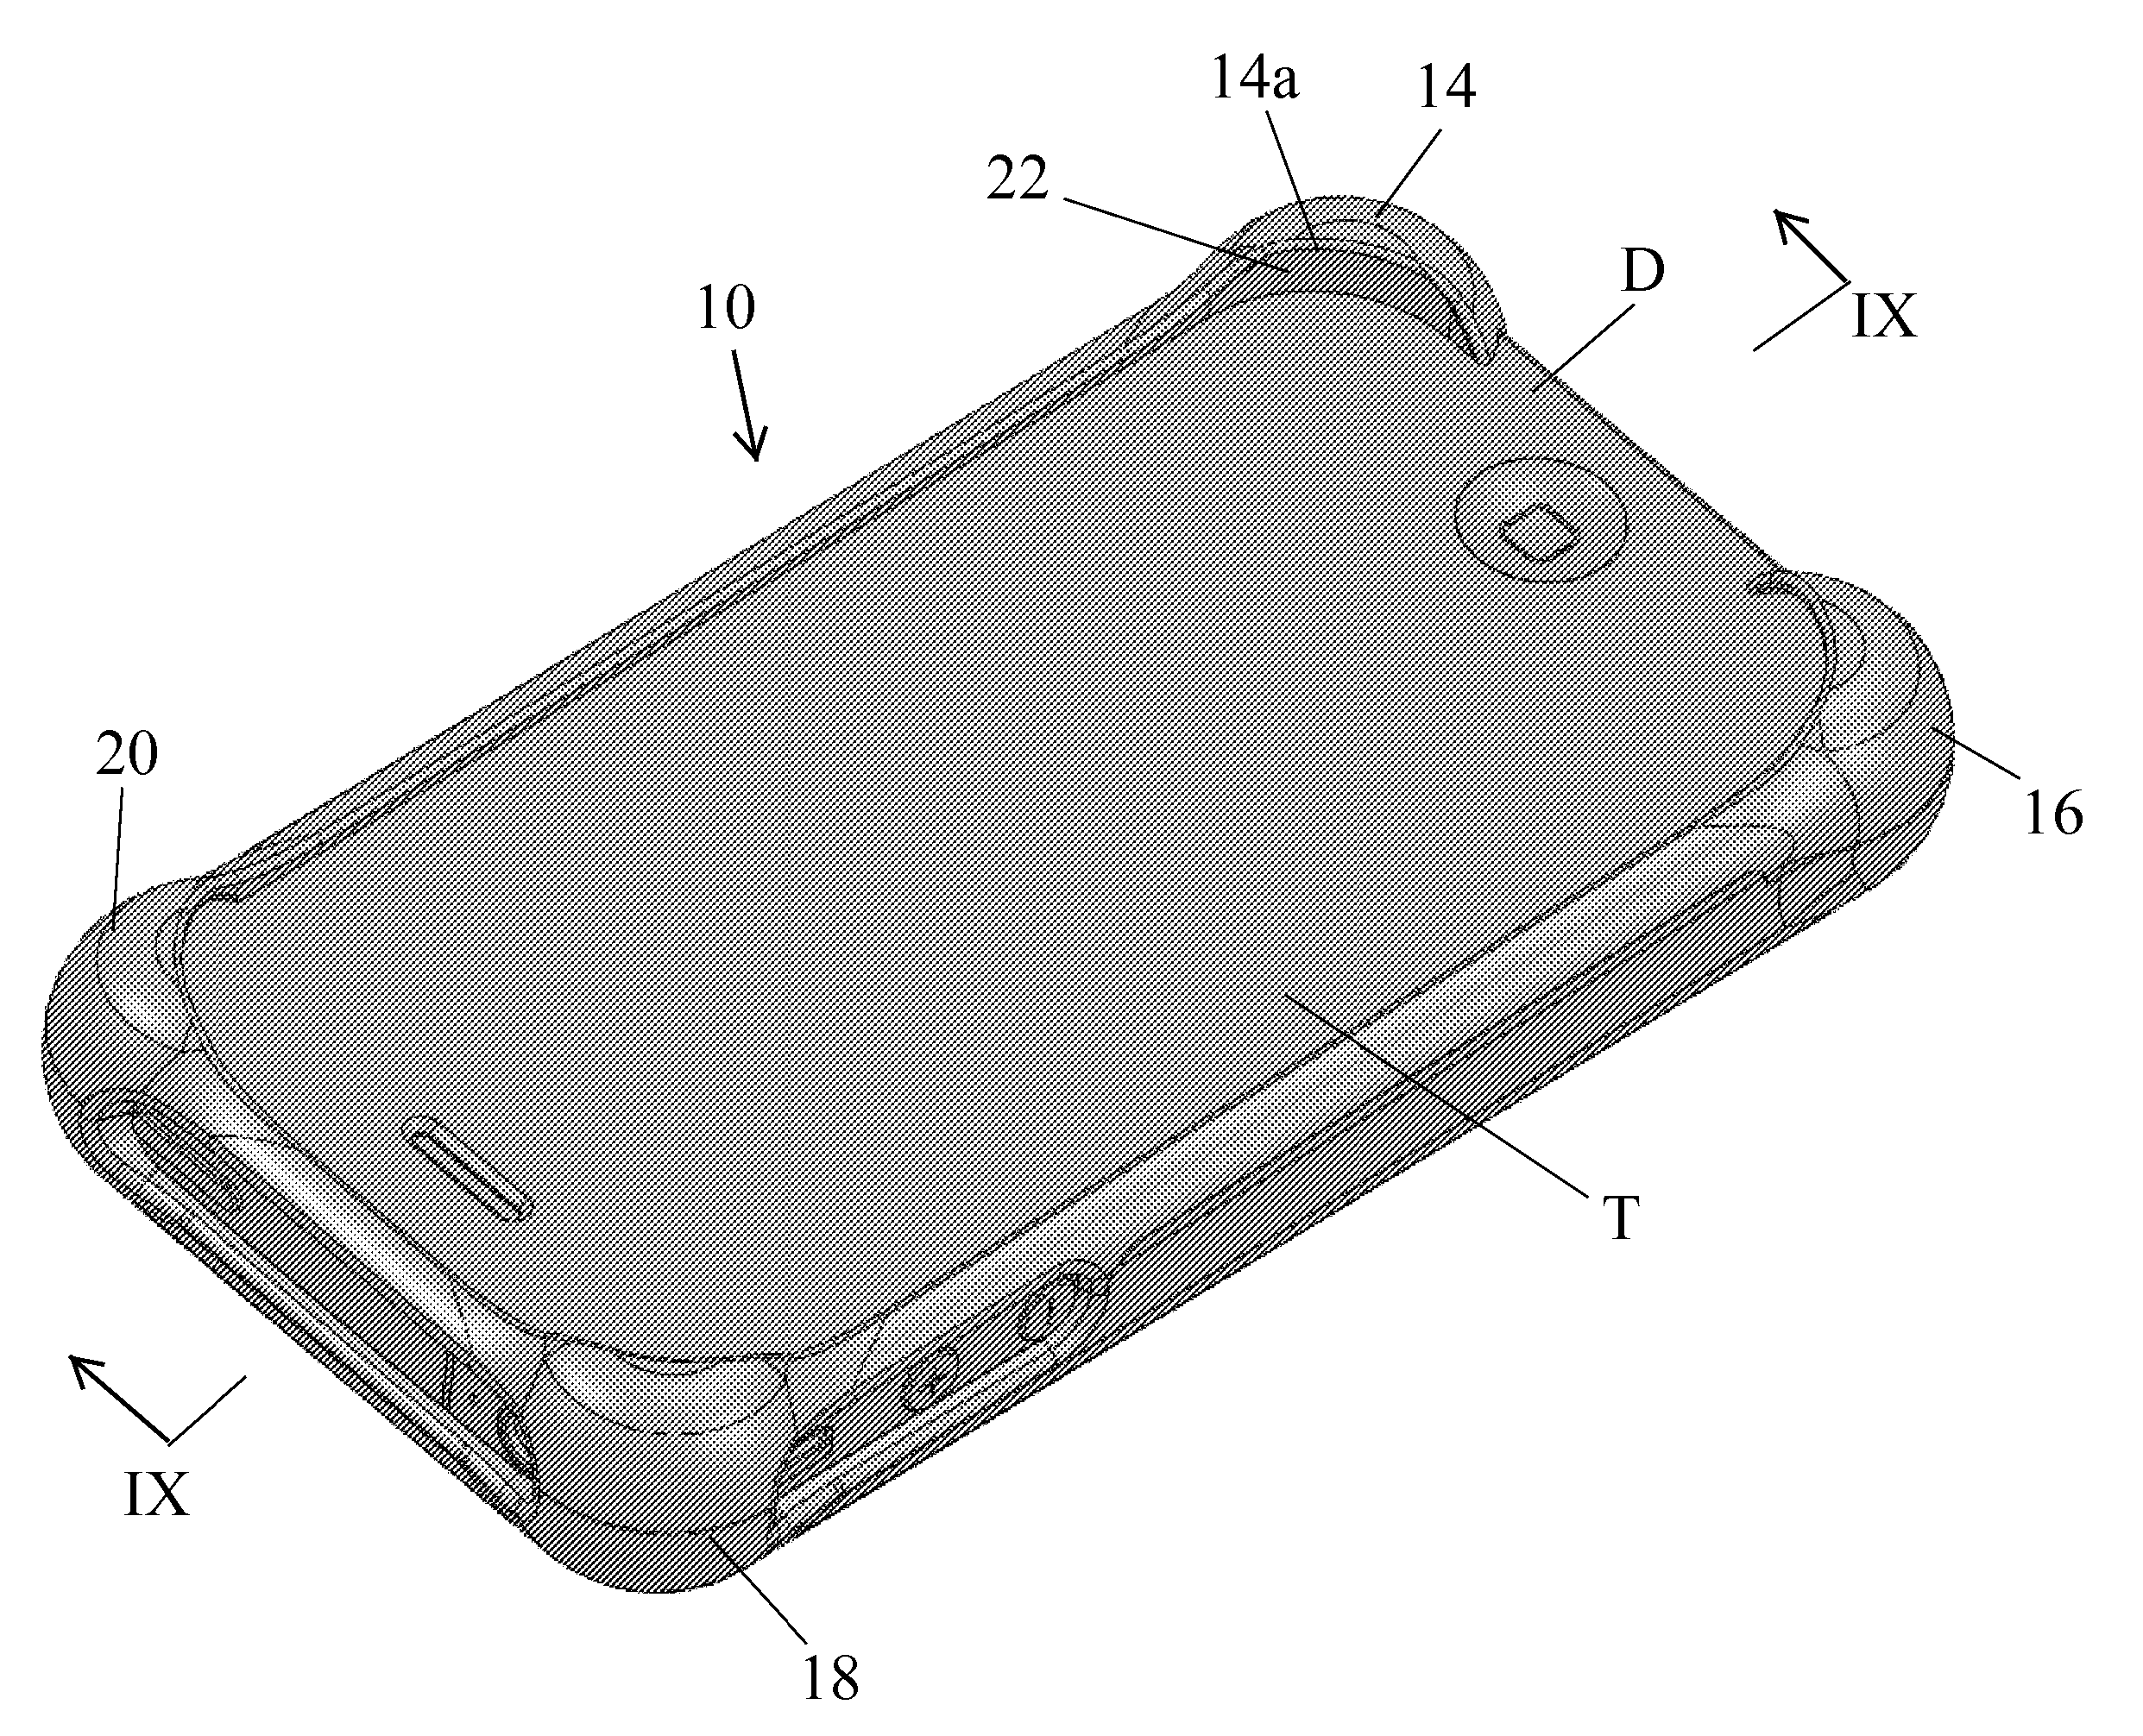 Cover for hand-held electronic device